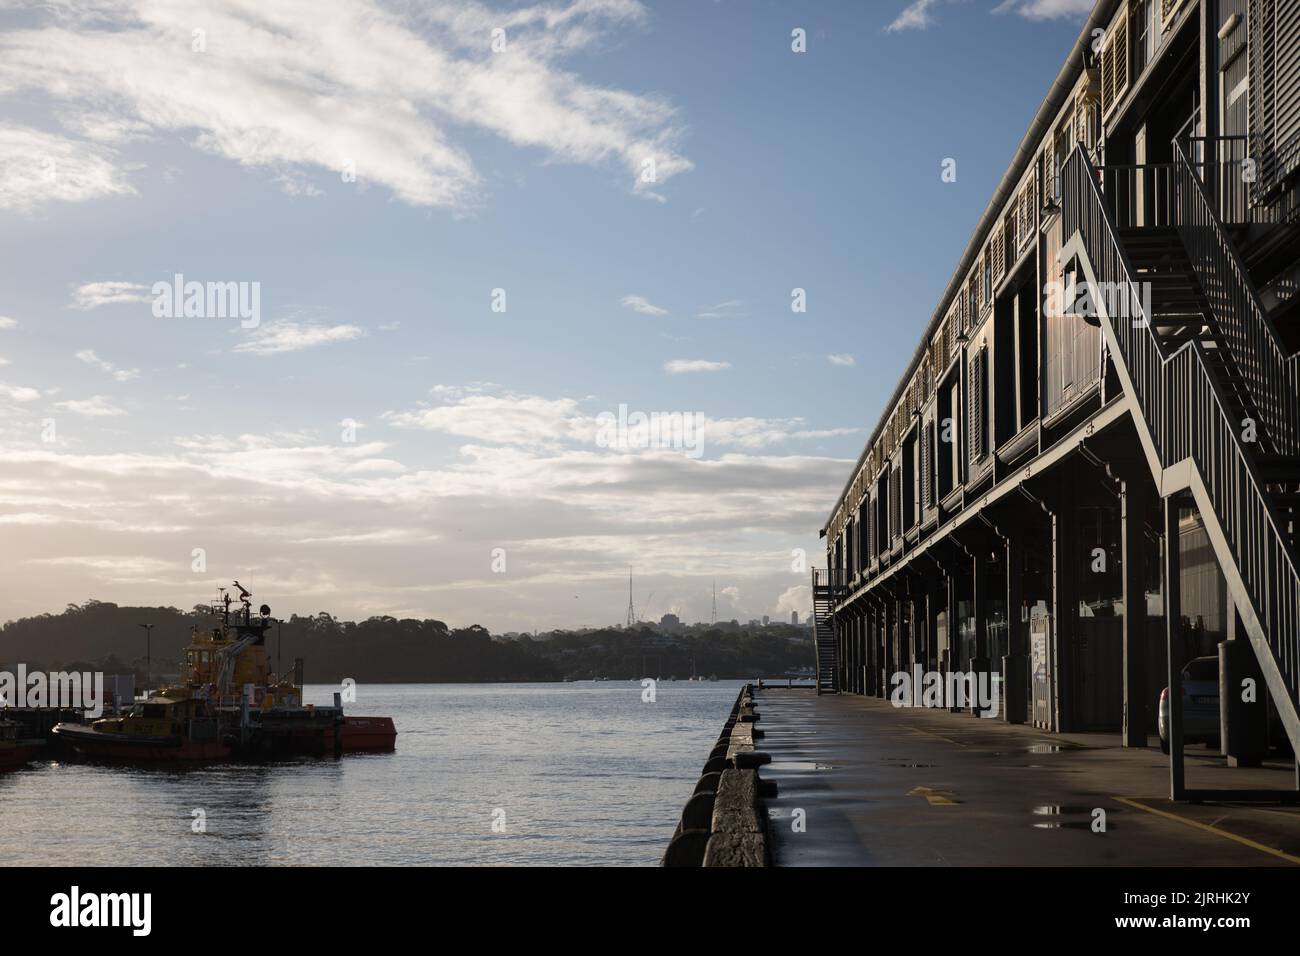 A scenic shot of the building with stairs in Walsh Bay Wharves Precinct,New South Wales, Australia Stock Photo